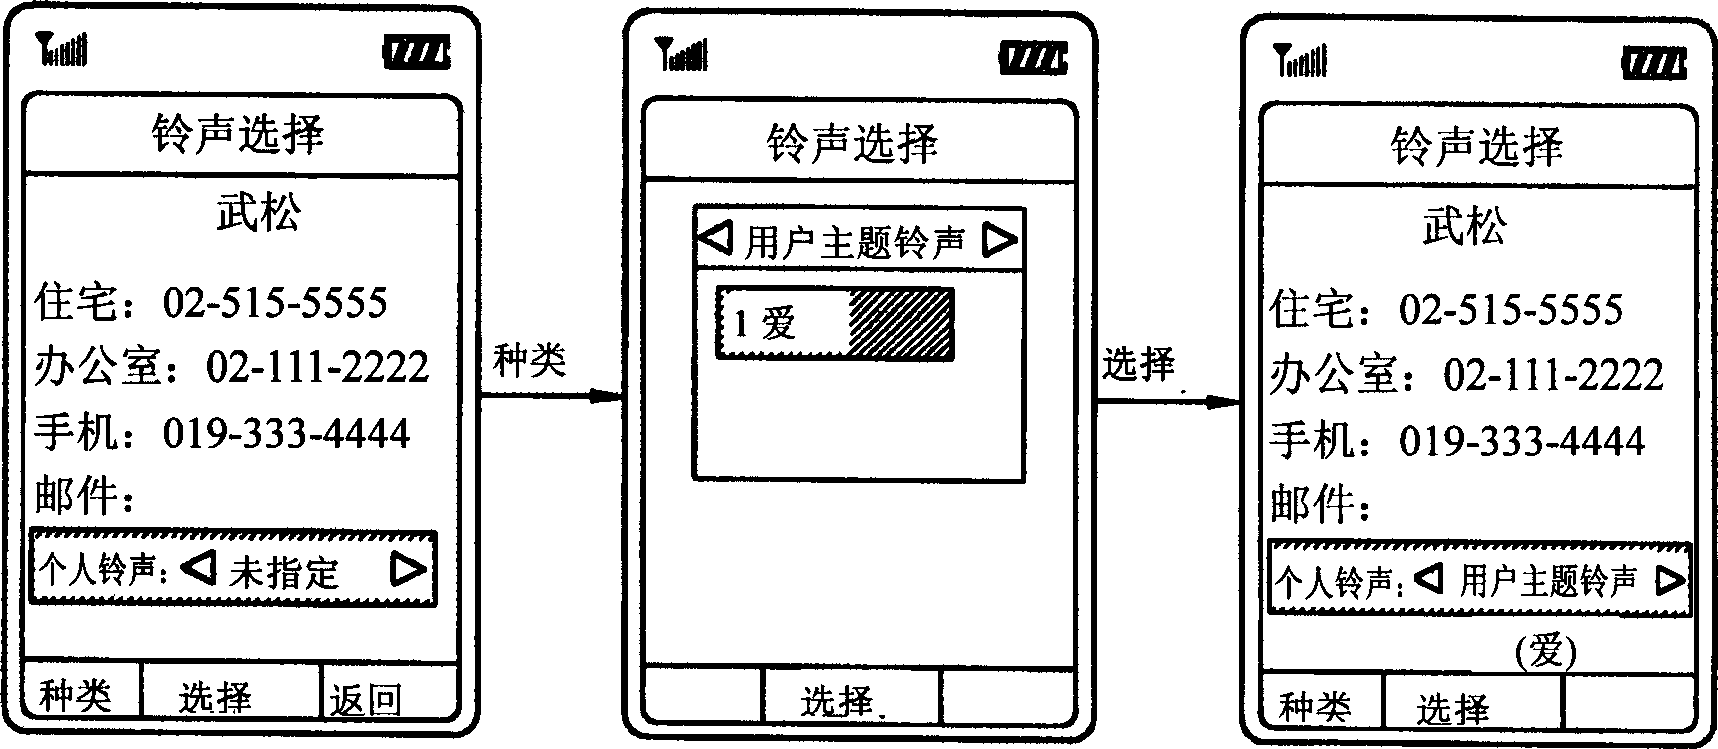 Ringing outputting method for mobile telephone